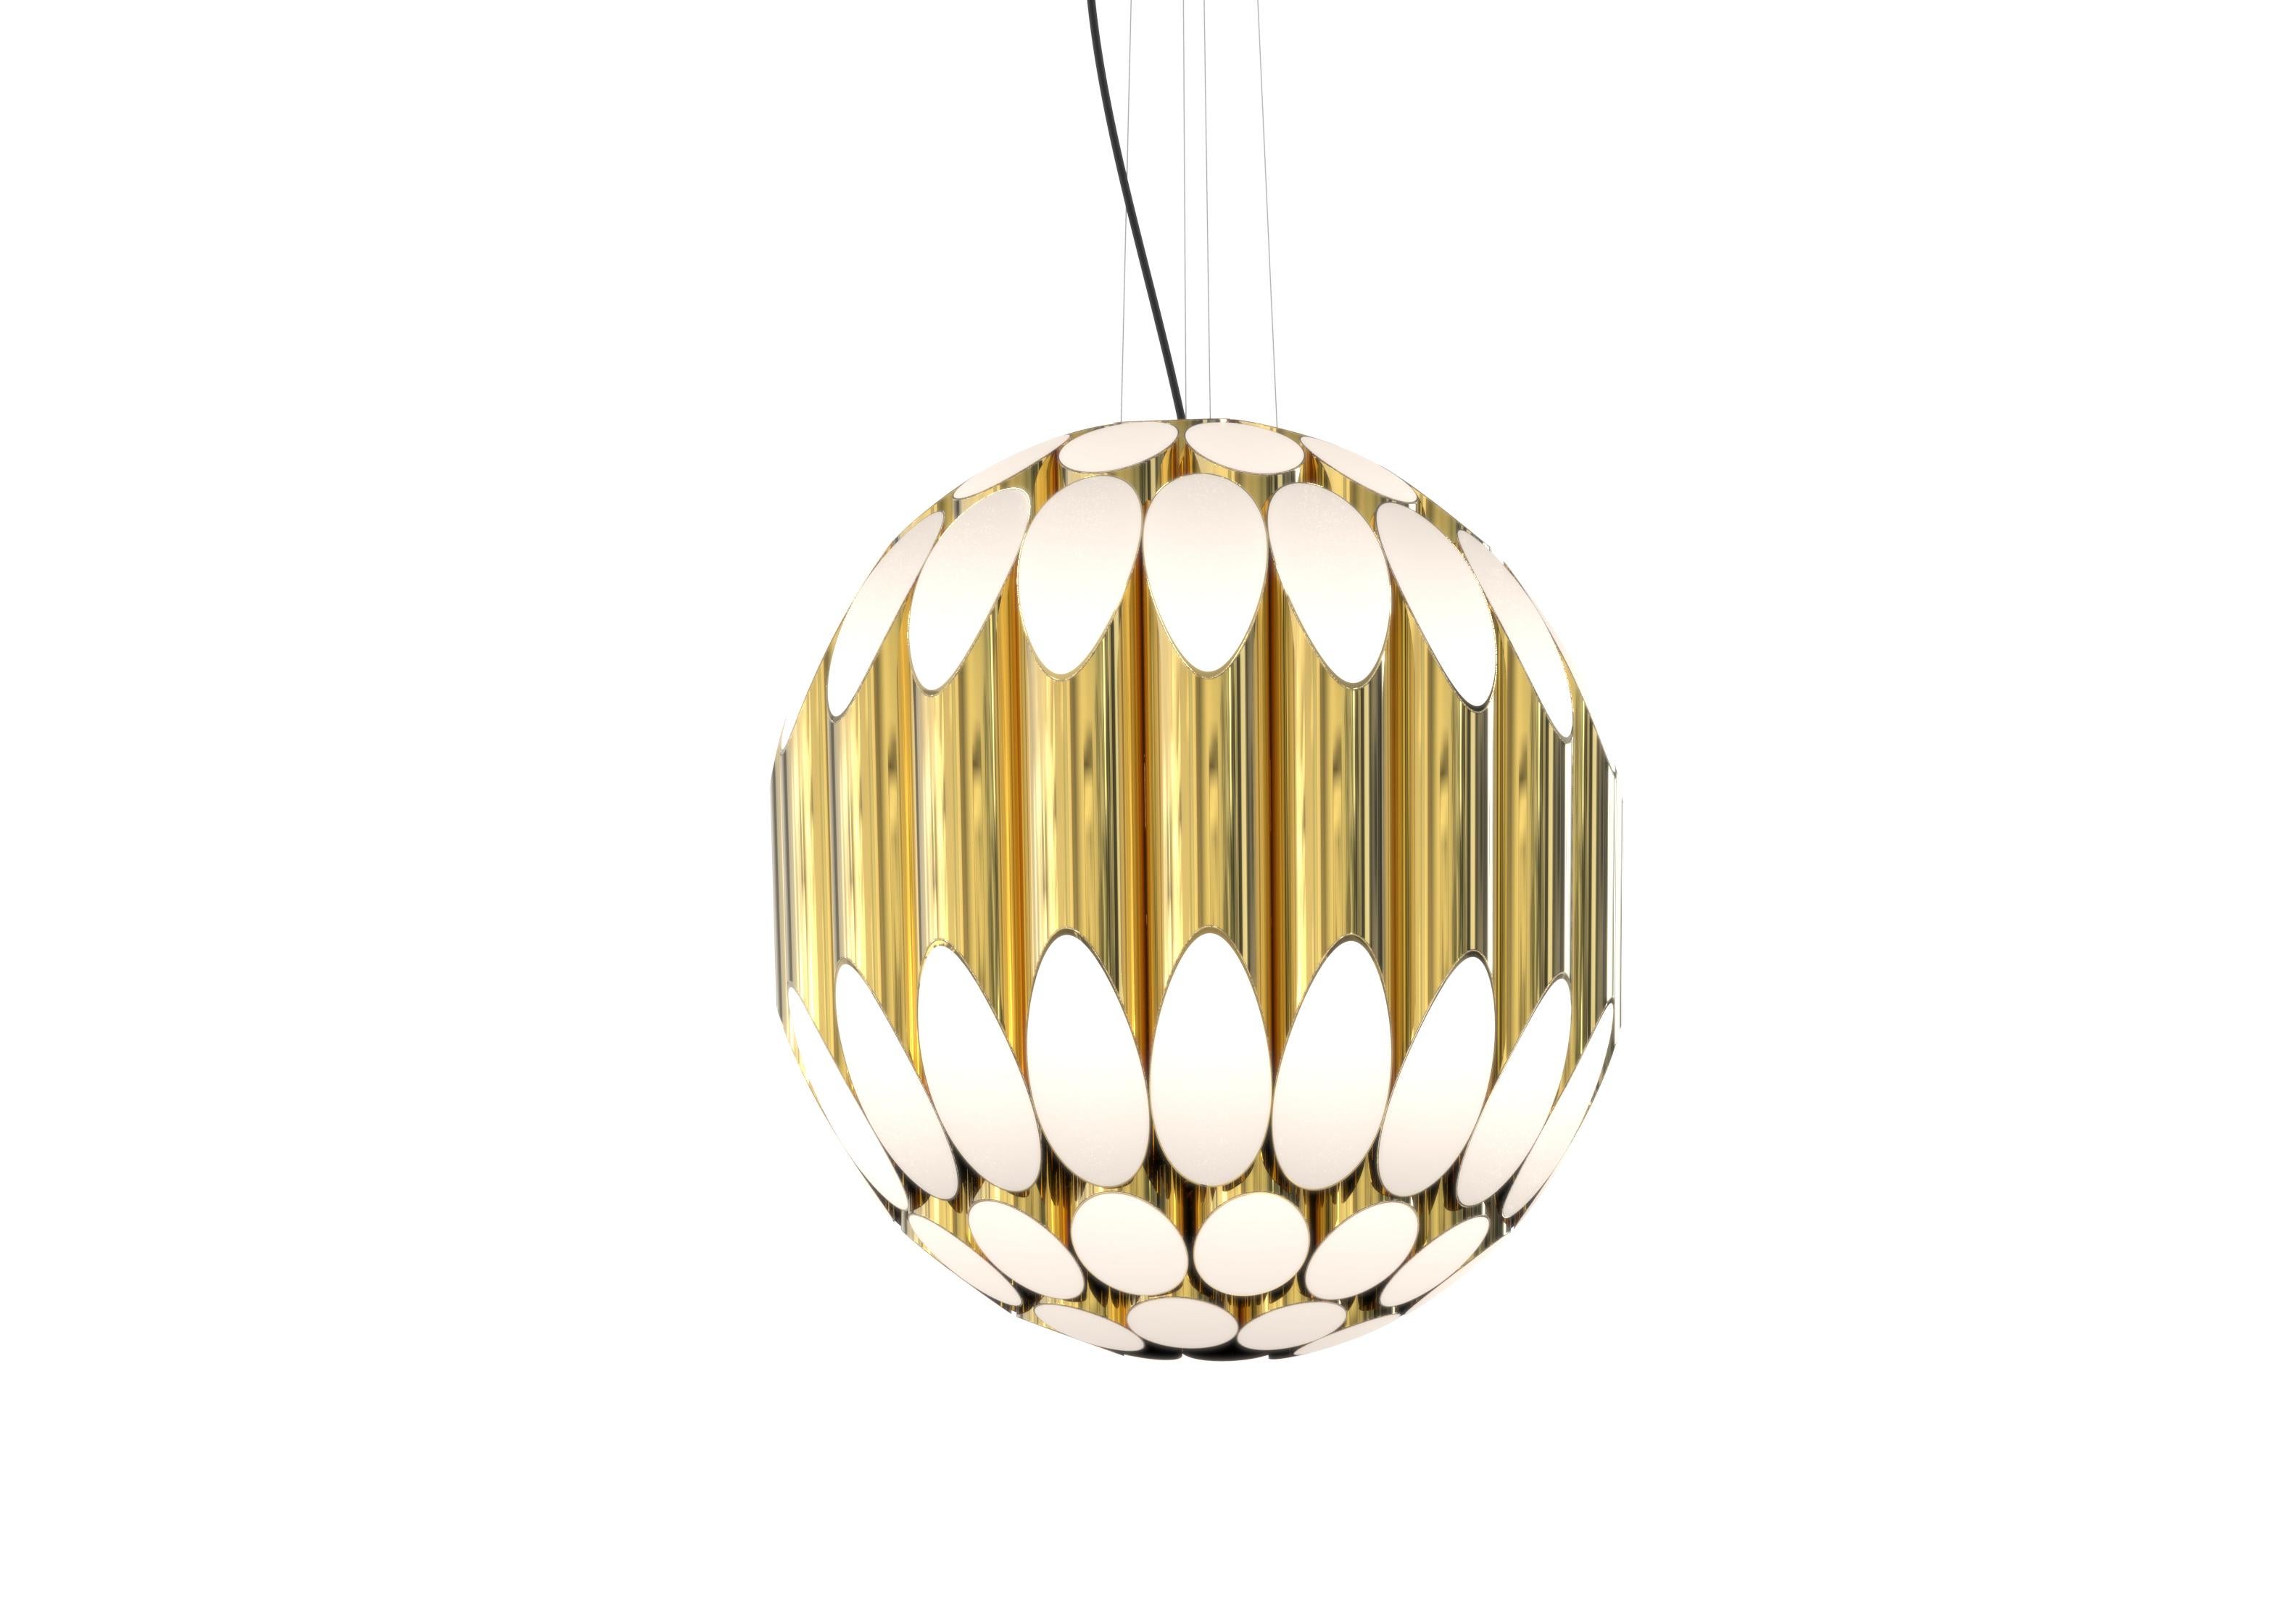 Inspired by the big afro hairstyles that popularized the 60s, Kravitz modern chandelier is also a tribute to the bold, multiple award-winning rock star, Lenny Kravitz. This unique chandelier has a series of tubes in a circular pattern trimmed to be